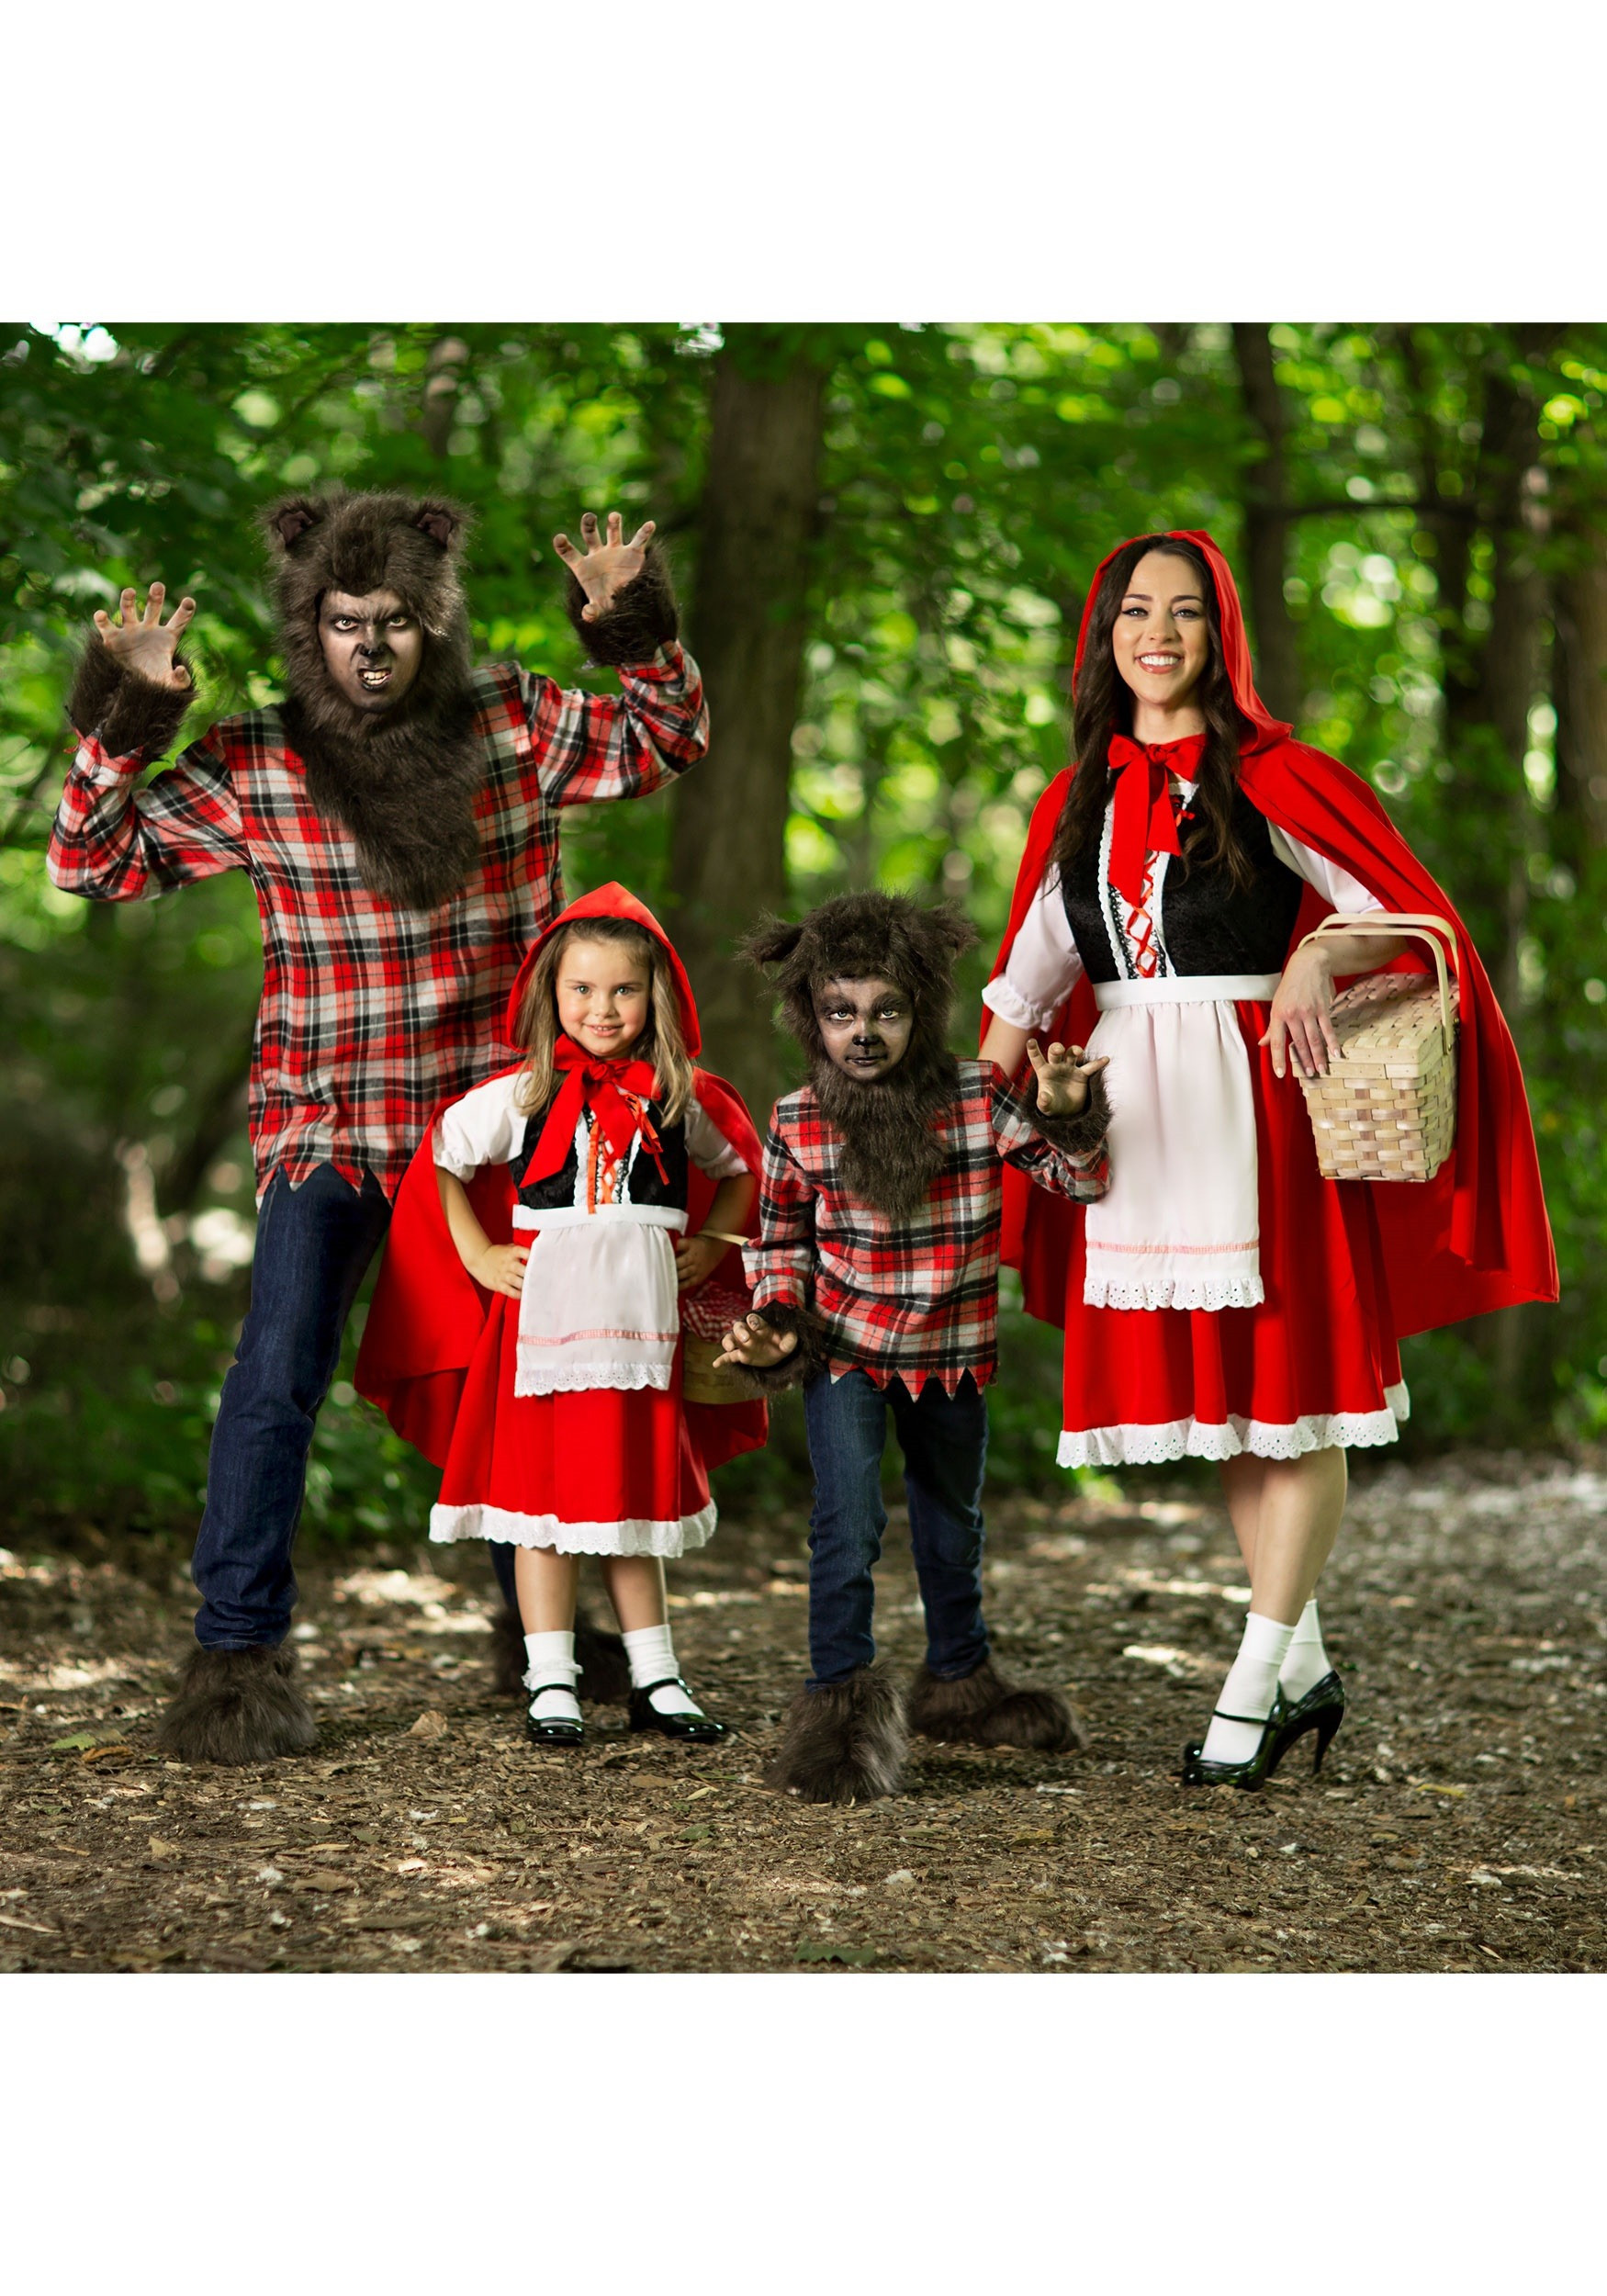 DIY Little Red Riding Hood Costume For Adults
 Little Red Riding Hood Costume for Adults